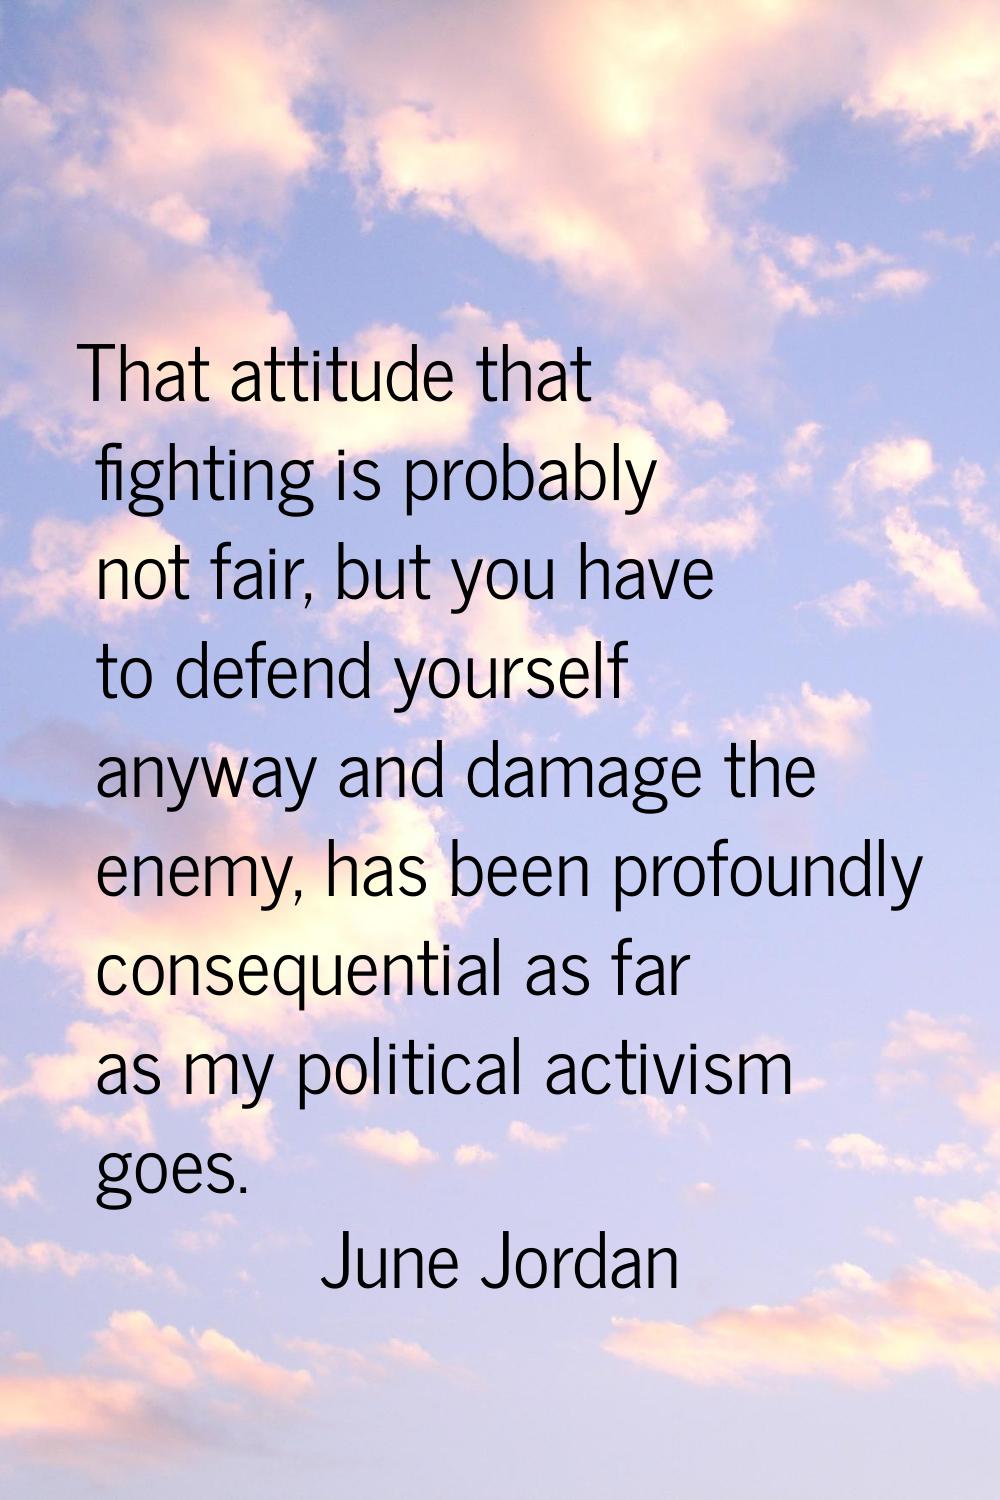 That attitude that fighting is probably not fair, but you have to defend yourself anyway and damage